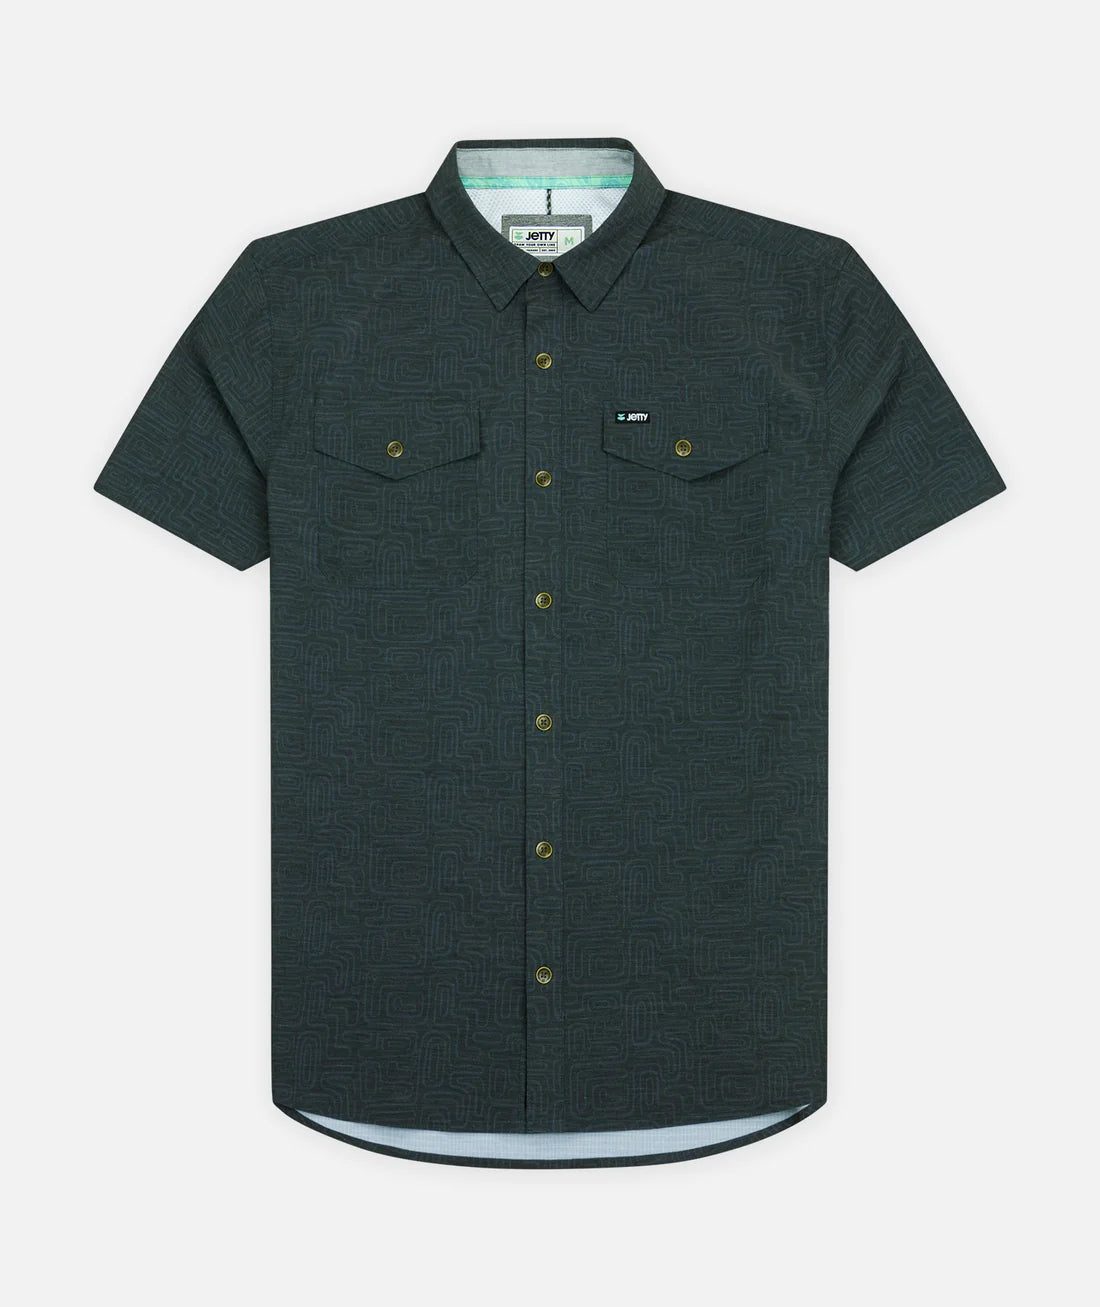 Jetty's Wellspoint Oystex Shirt in the color Black